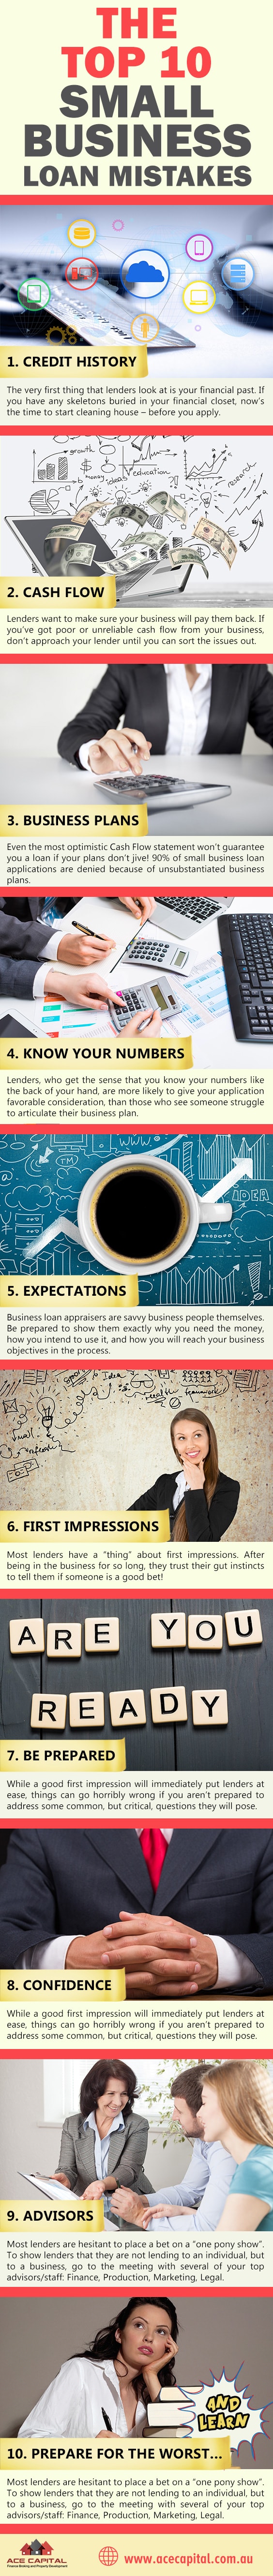 tips on getting a small business loan